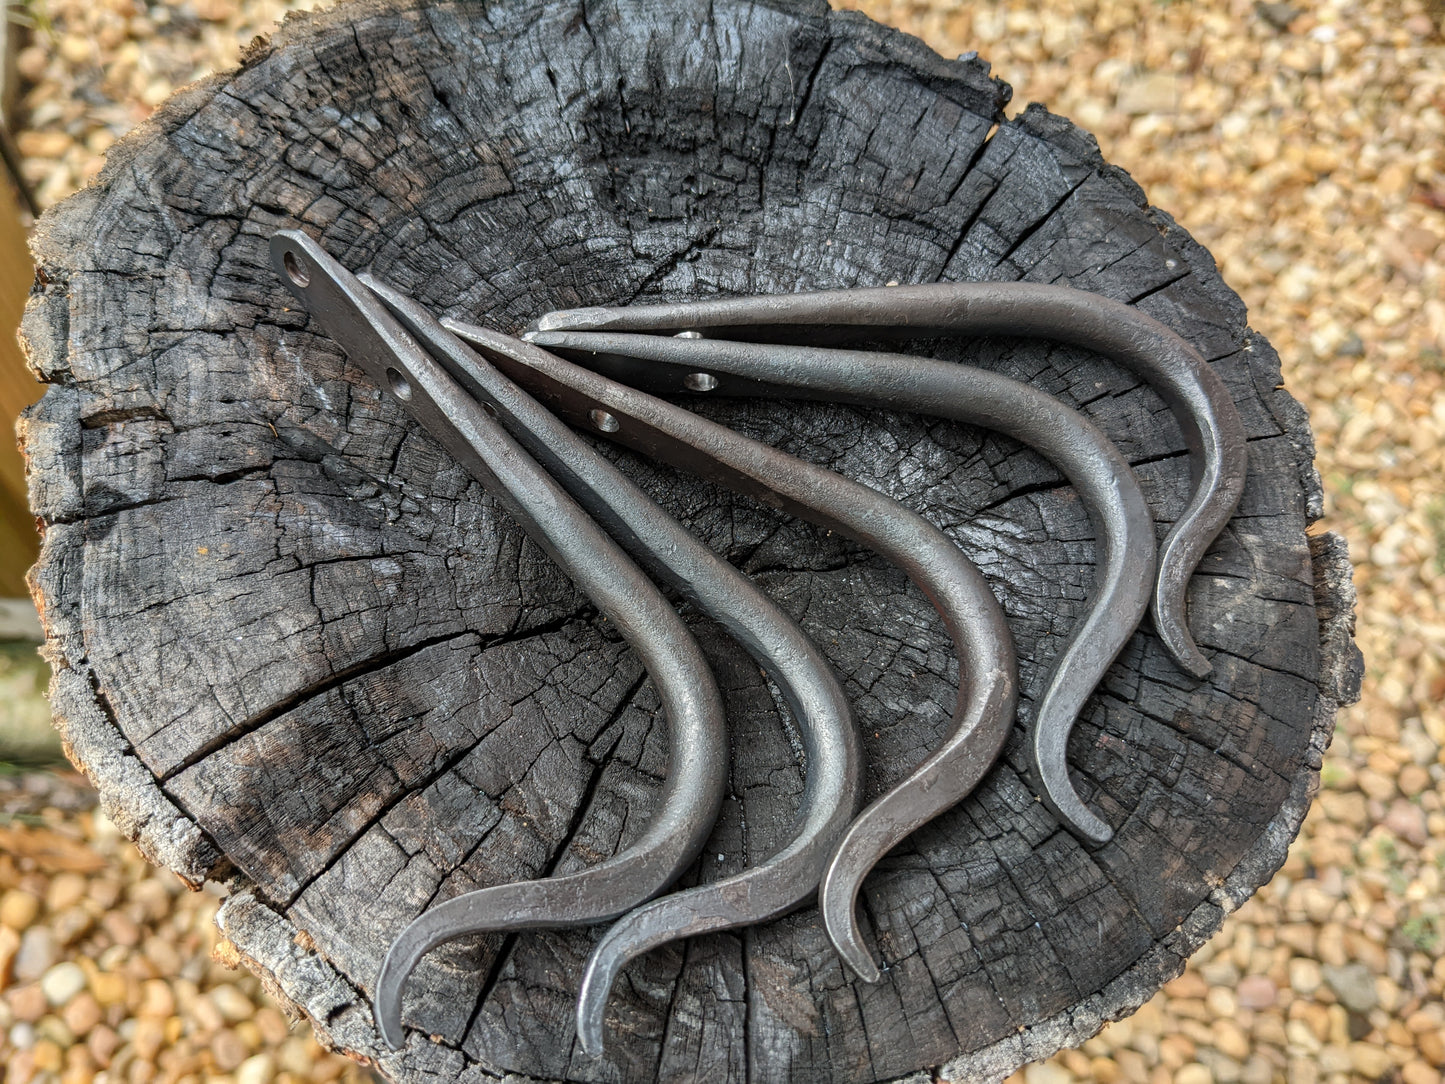 Hand Forged Display Hook